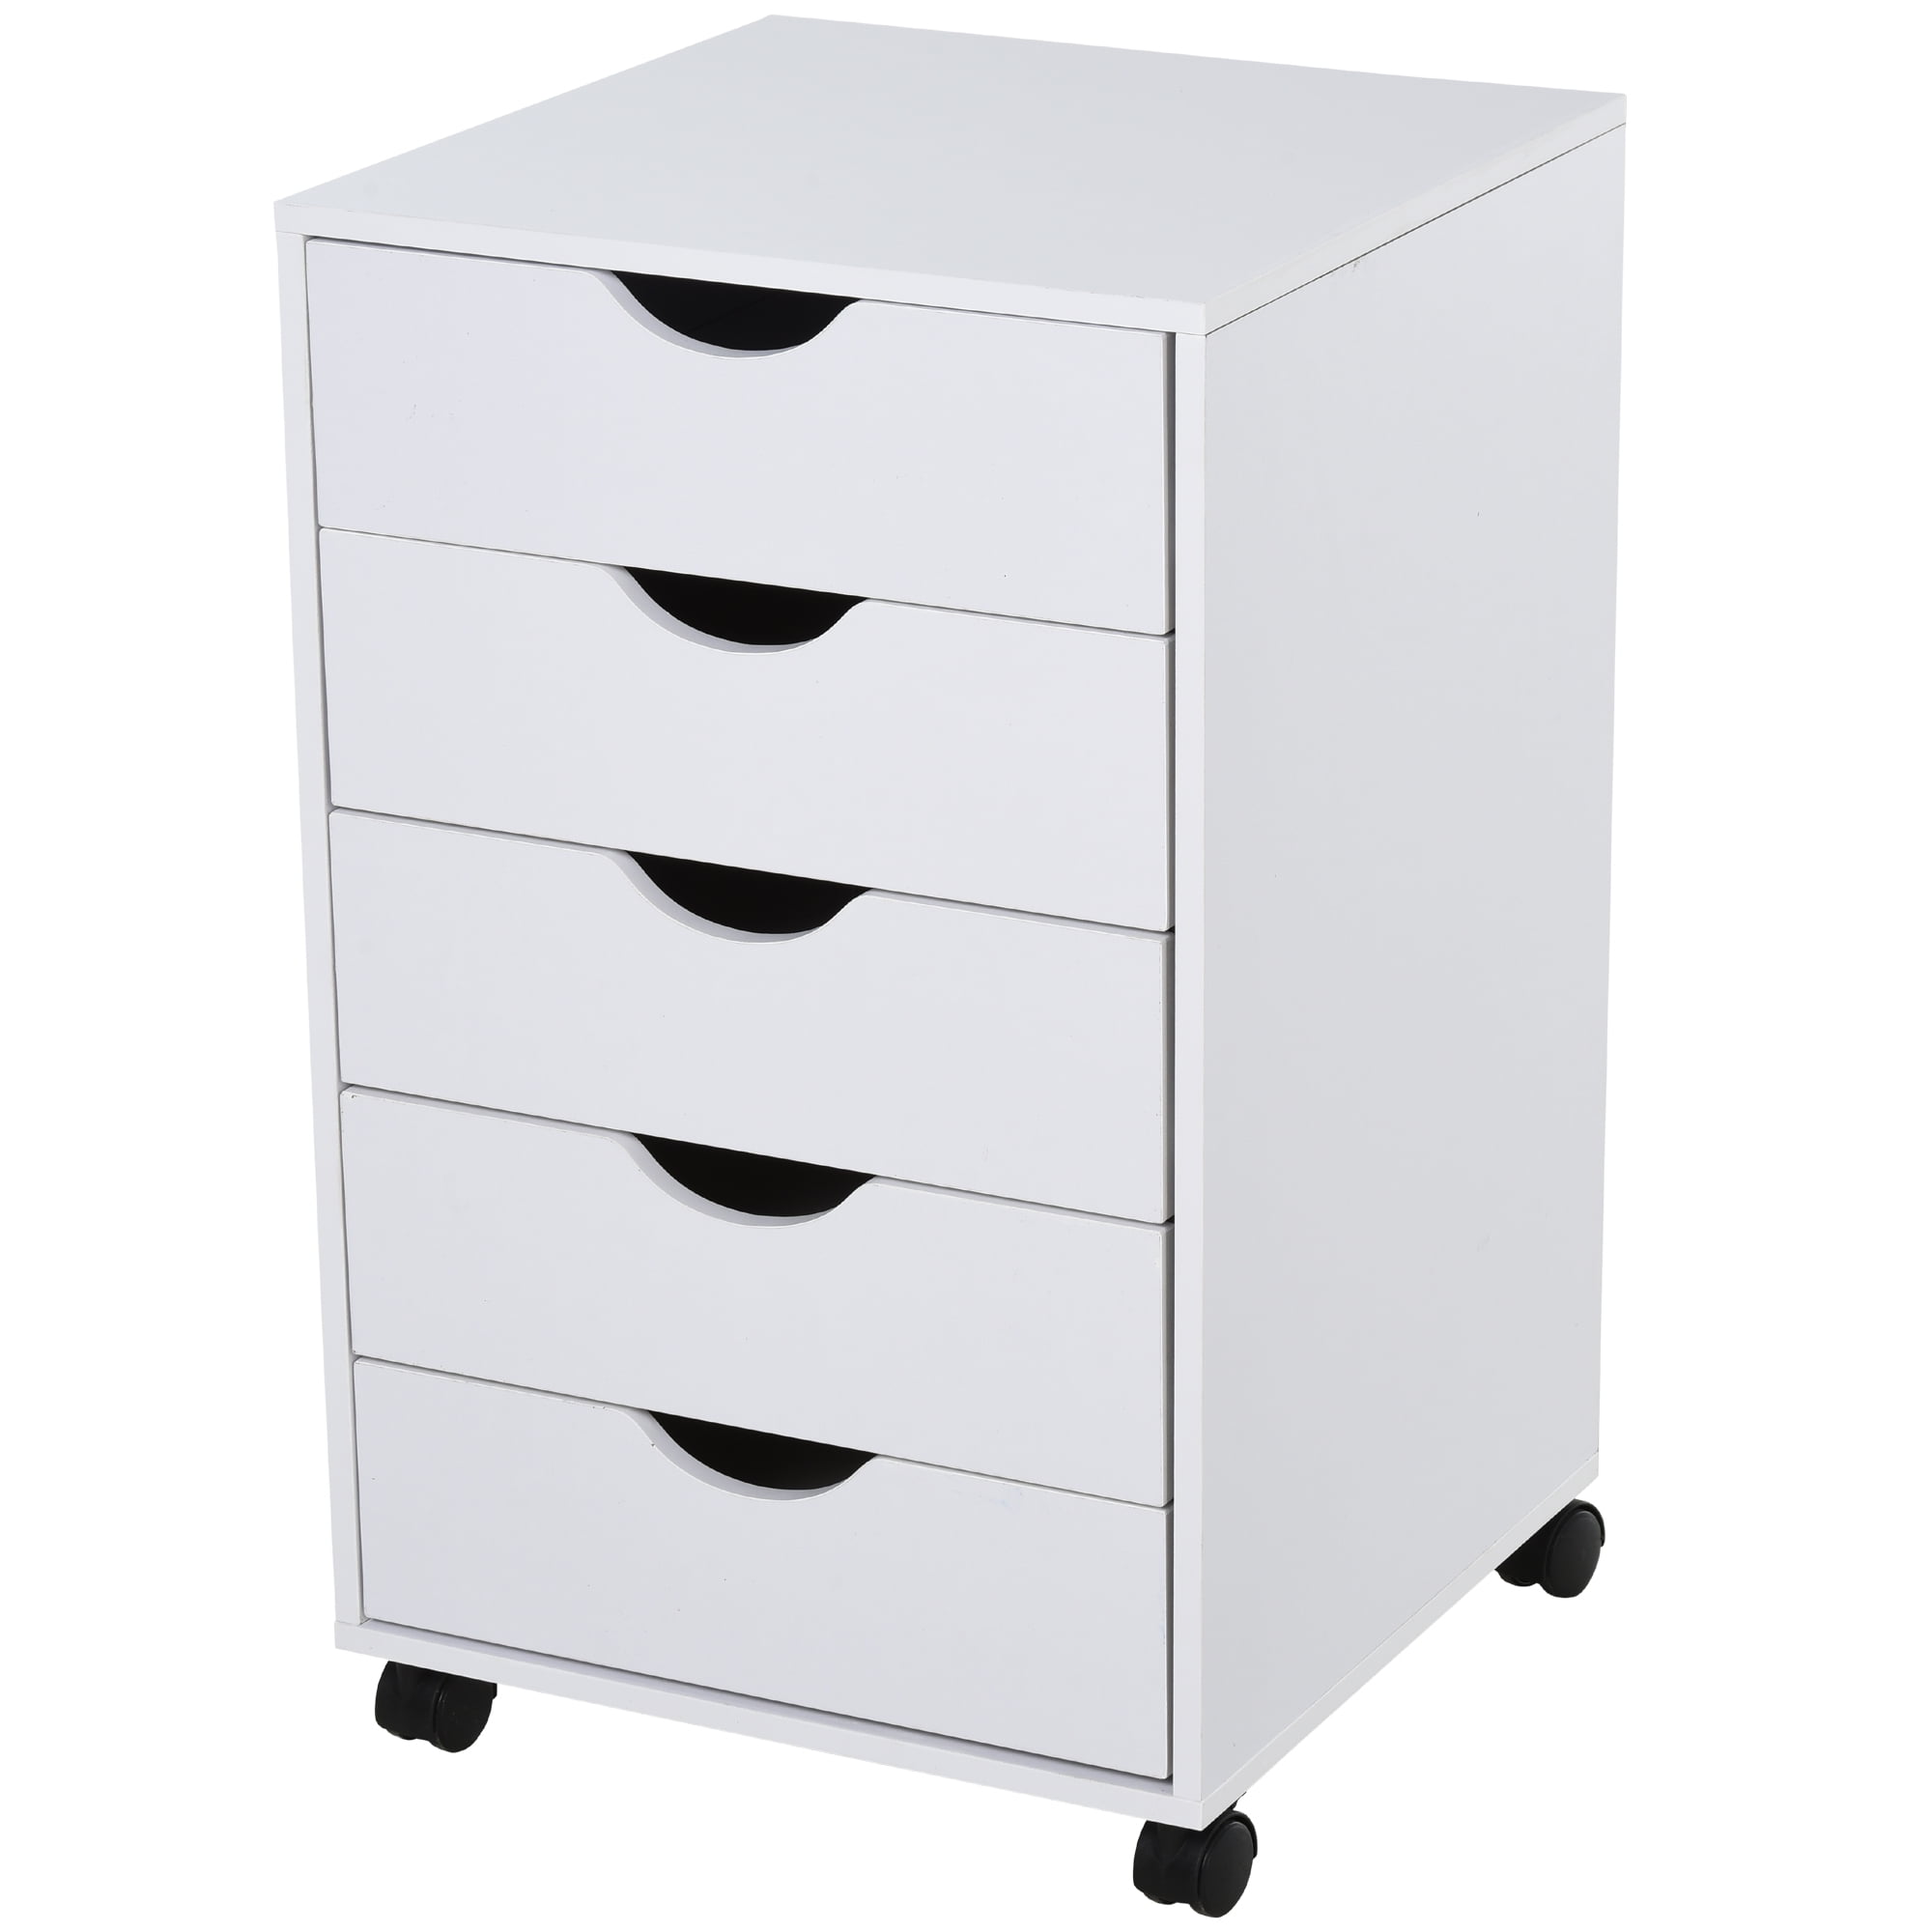 Details about   4-Drawer 26-1/2" Mobile Storage Cabinet 